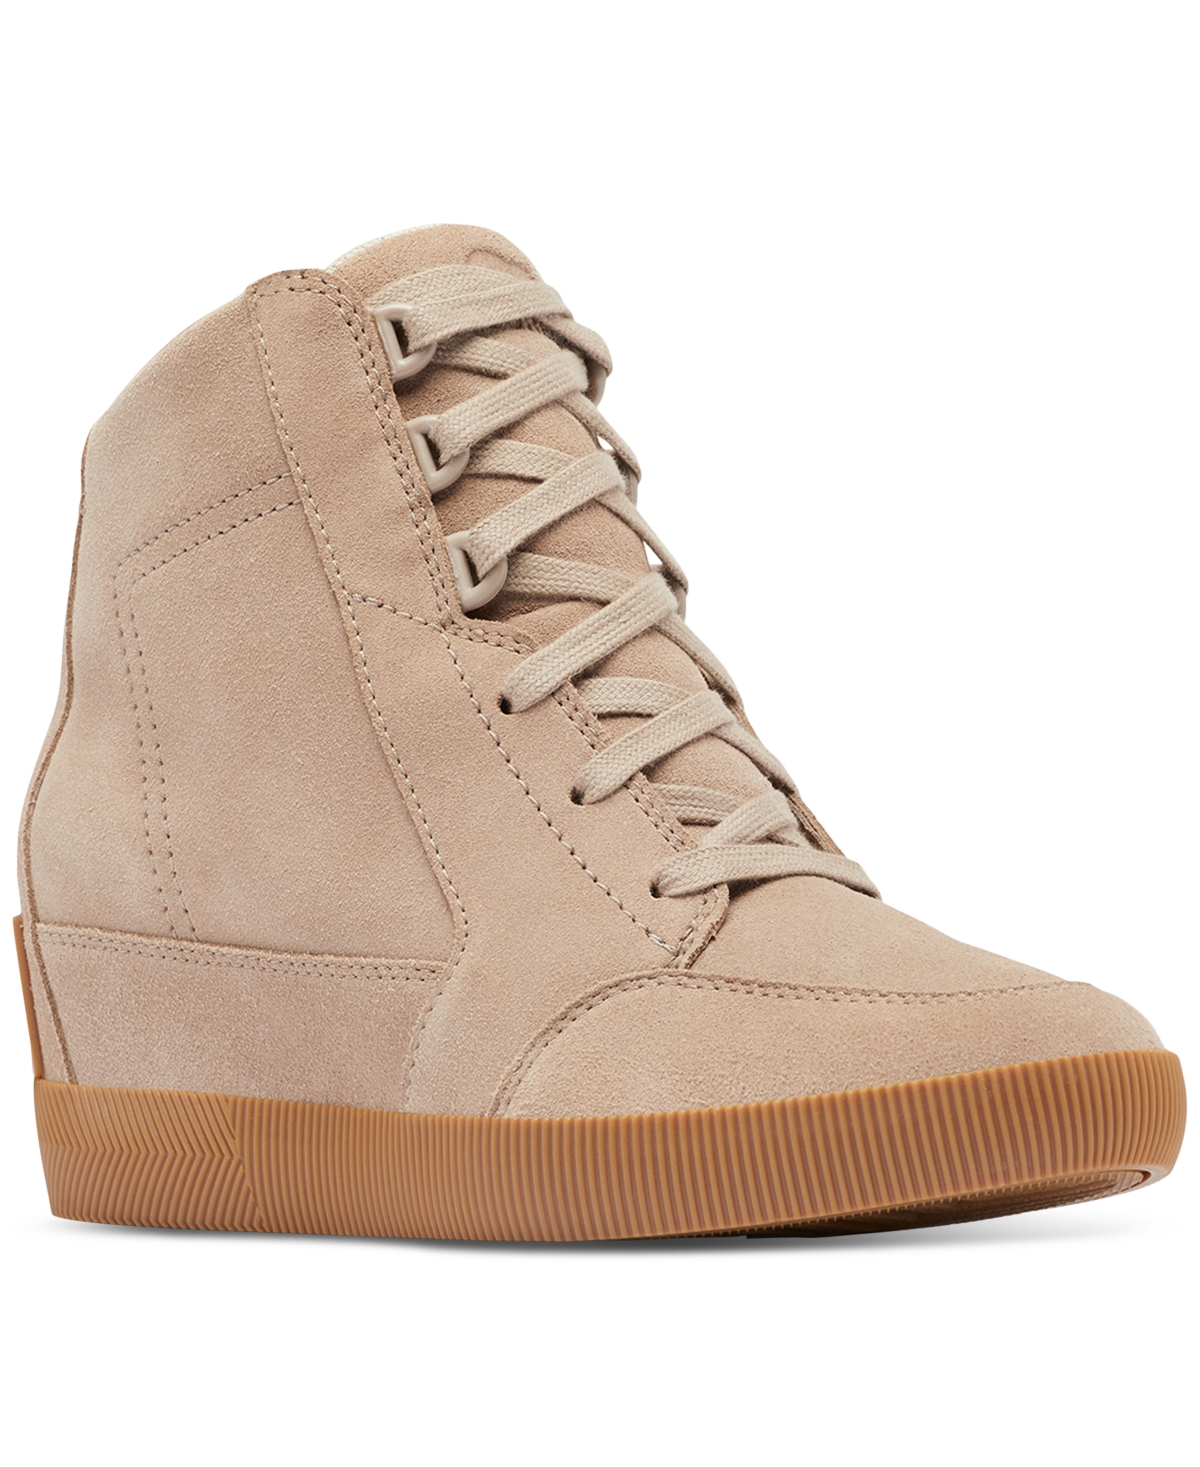 Out N About Ii Lace-Up Wedge Sneakers - Omega Taupe, Gum